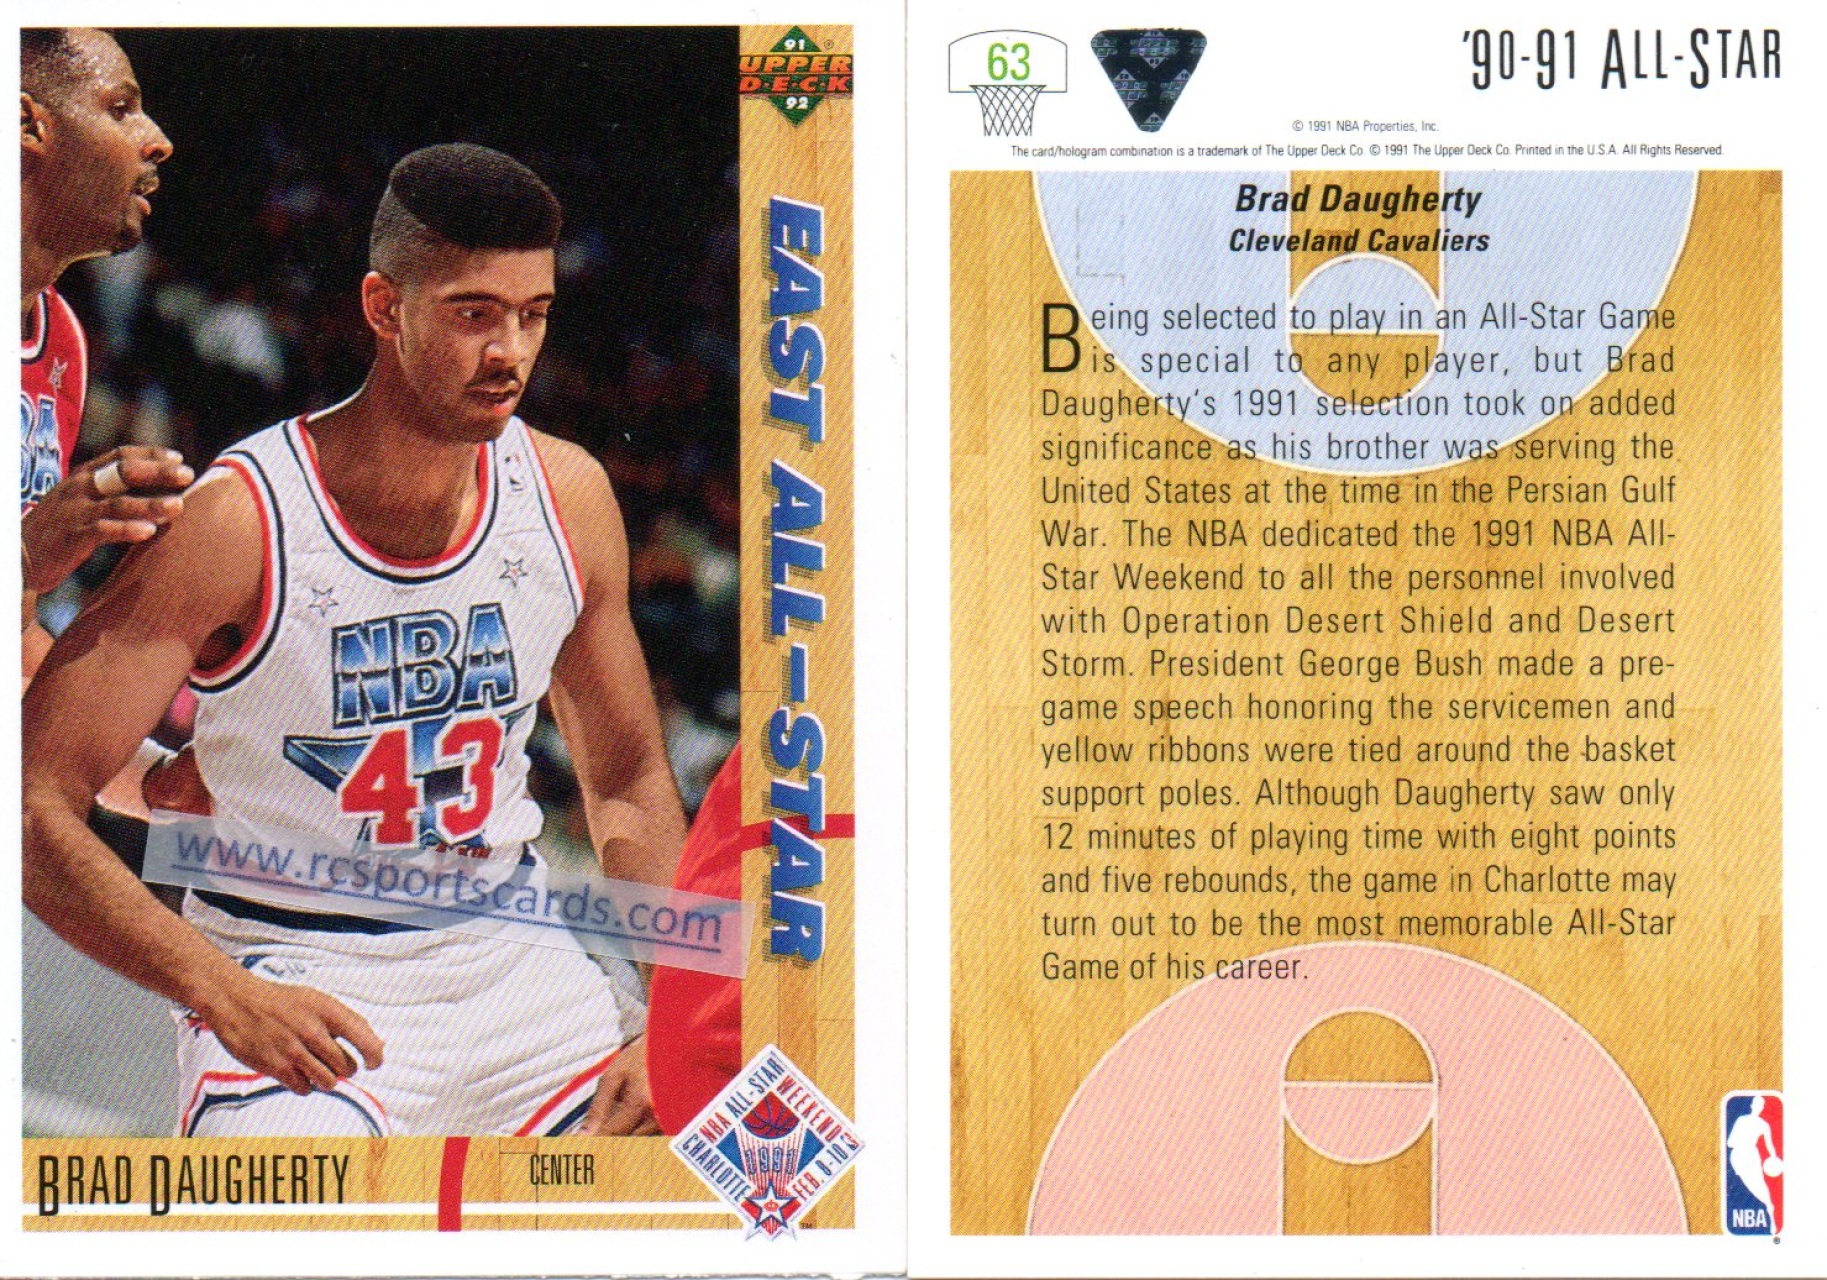  1992-93 Topps Archives Gold #6 Brad Daugherty FDP NM-MT  Cleveland Cavaliers Basketball NBA : Collectibles & Fine Art